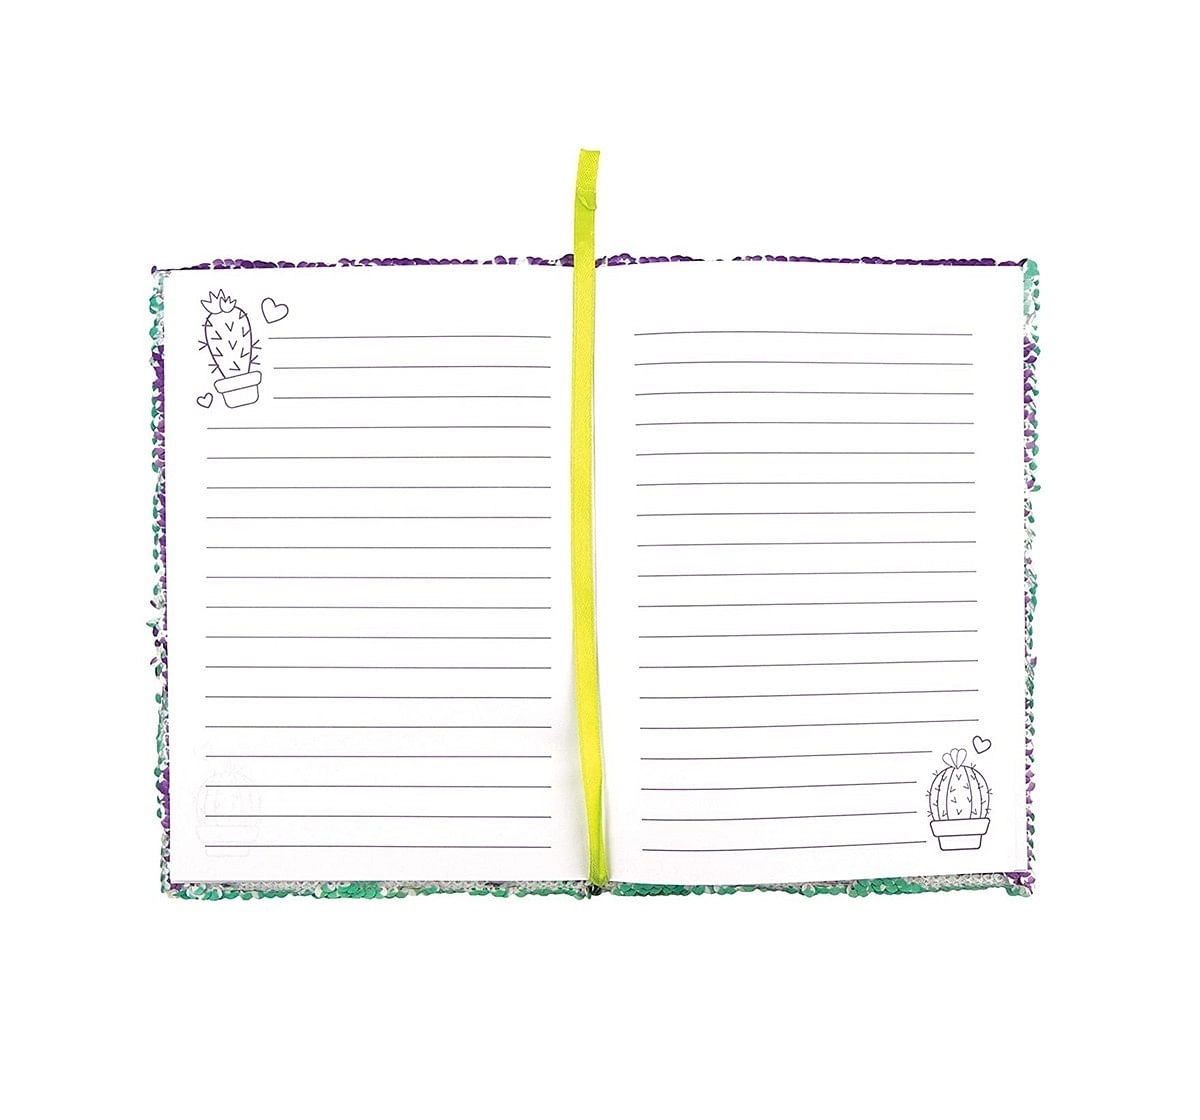 Fashion Angels Sequin Cactus/Reveal Journal Study & Desk Accessories for age 6Y+ 